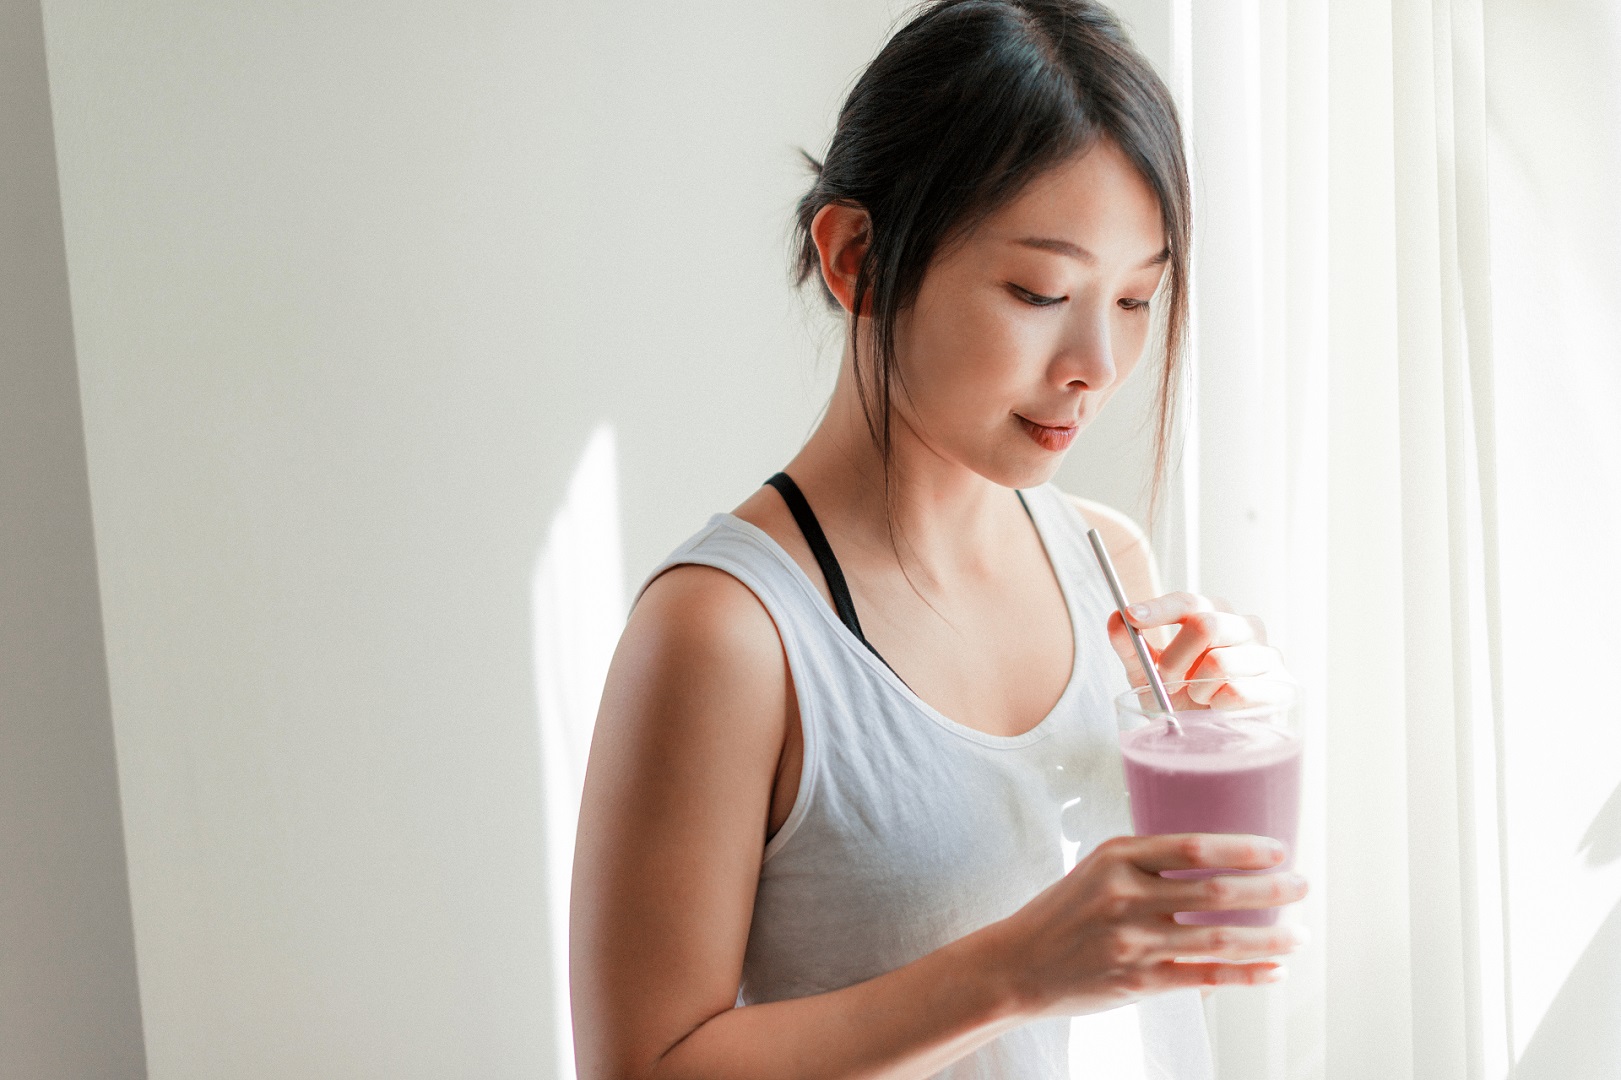 Can Meal Replacement Shakes Help You